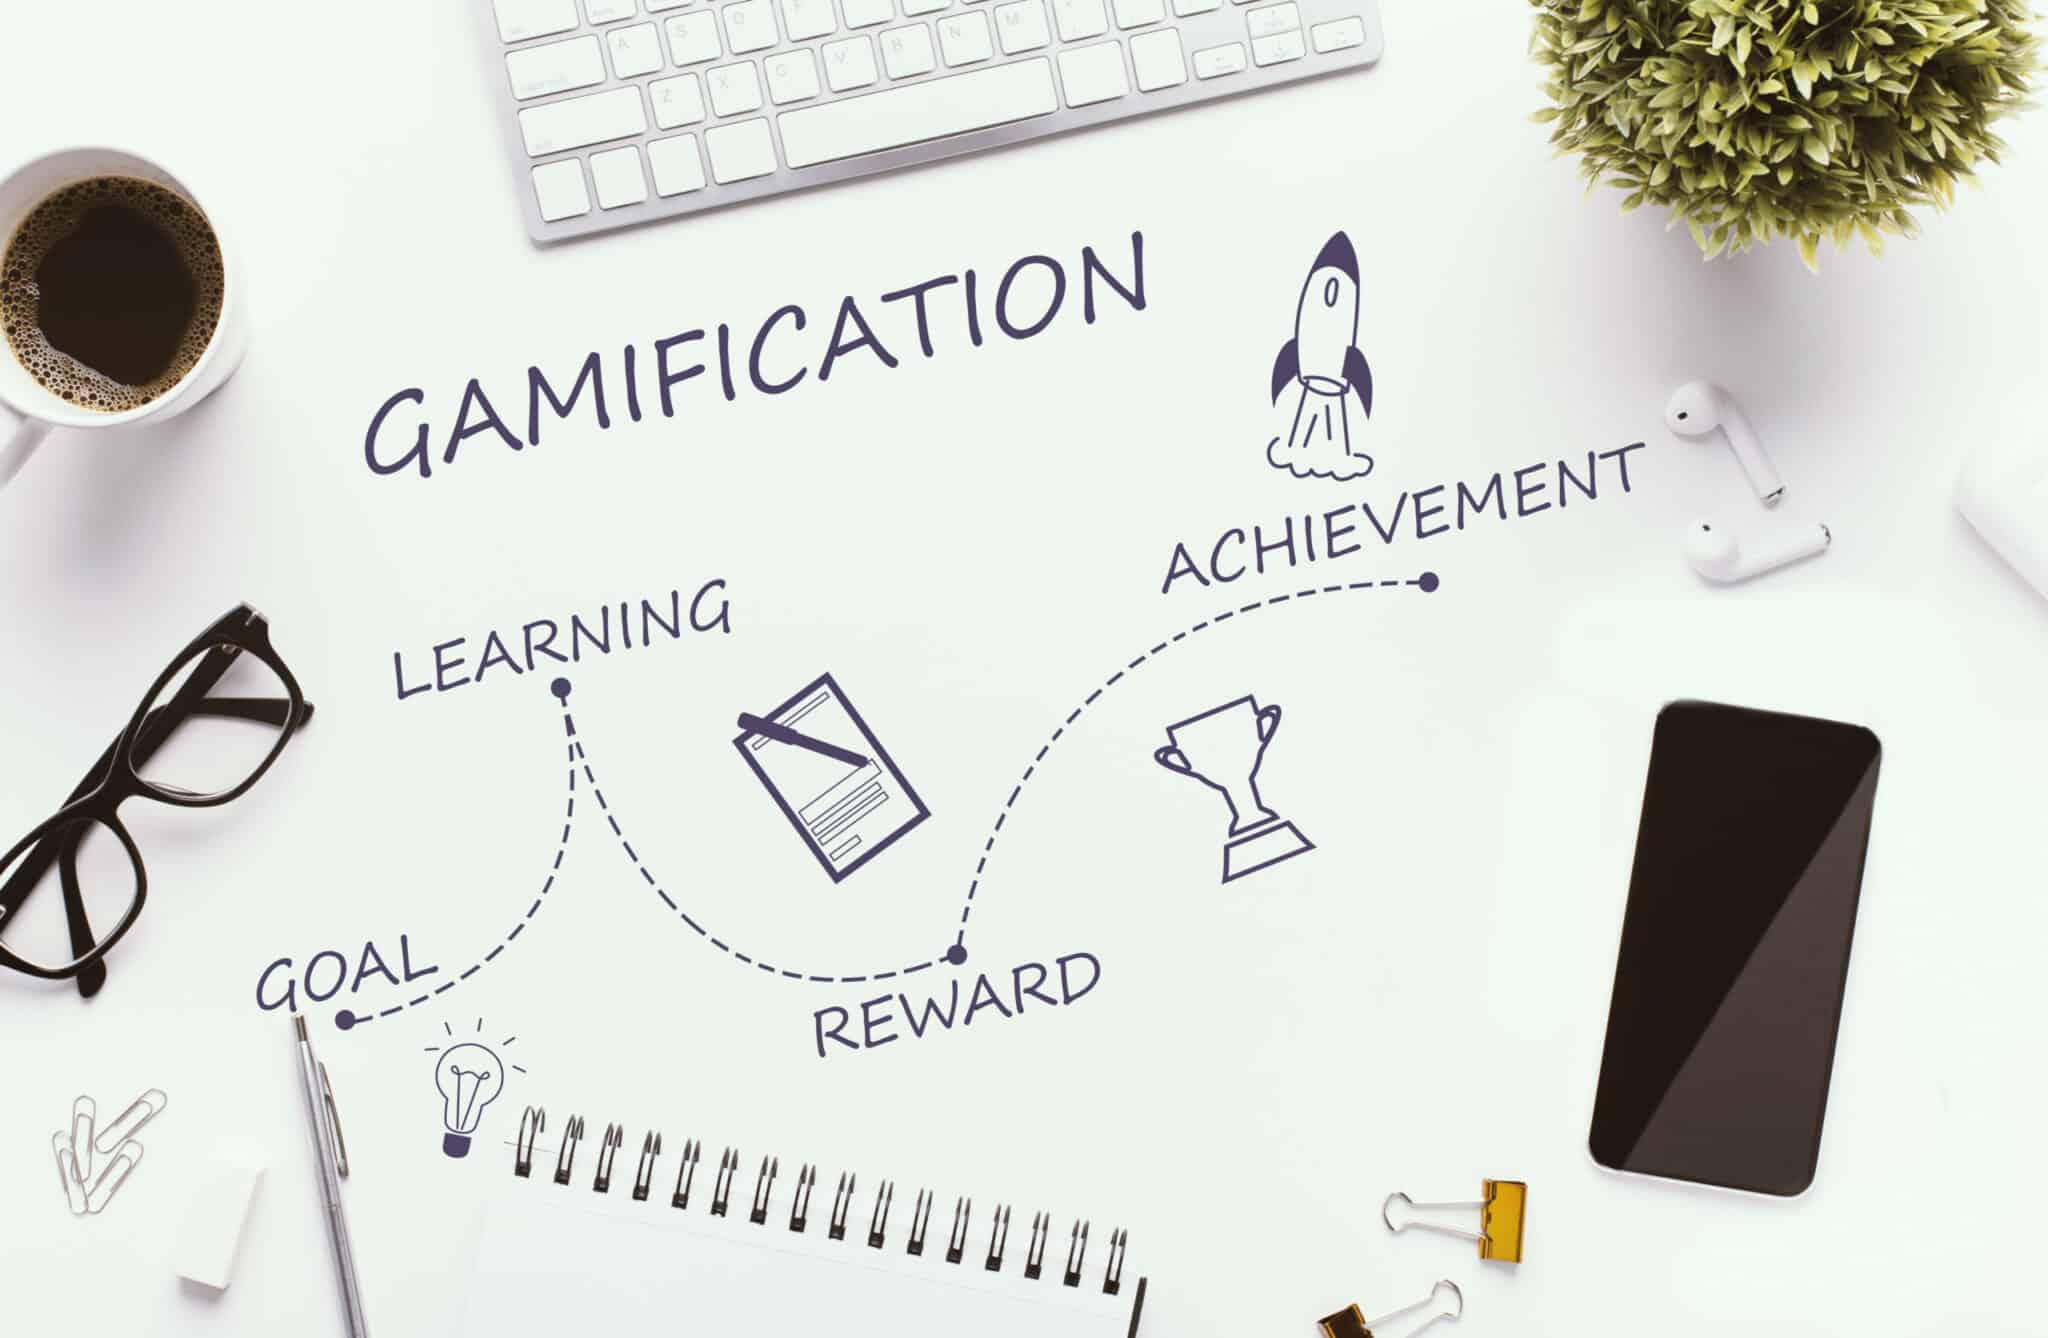 Operator Safety & The Psychology of Gamification